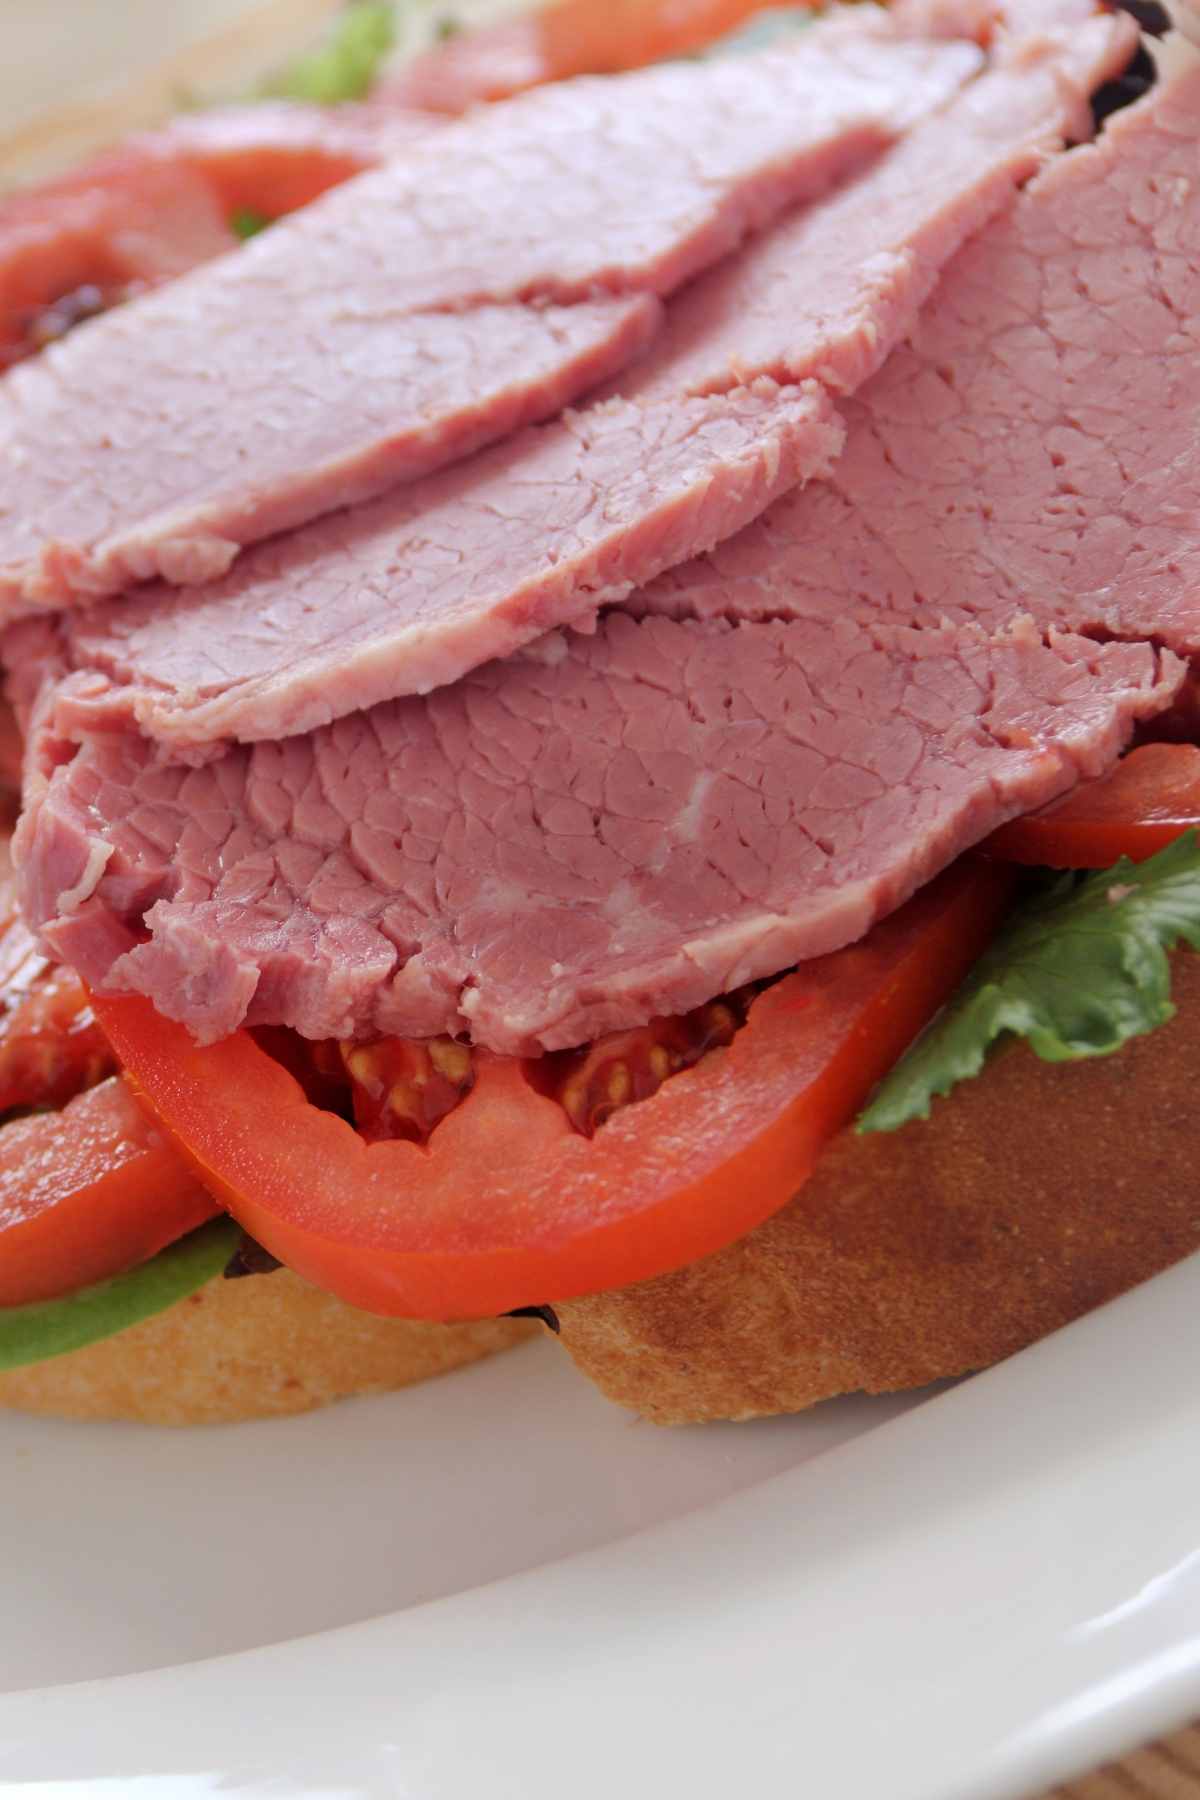 The next time you’re looking for something different to serve for dinner, try corned beef! In this post, we’re sharing some tips on how to cook corned beef, including the ideal internal temperature to achieve moist and delicious results.